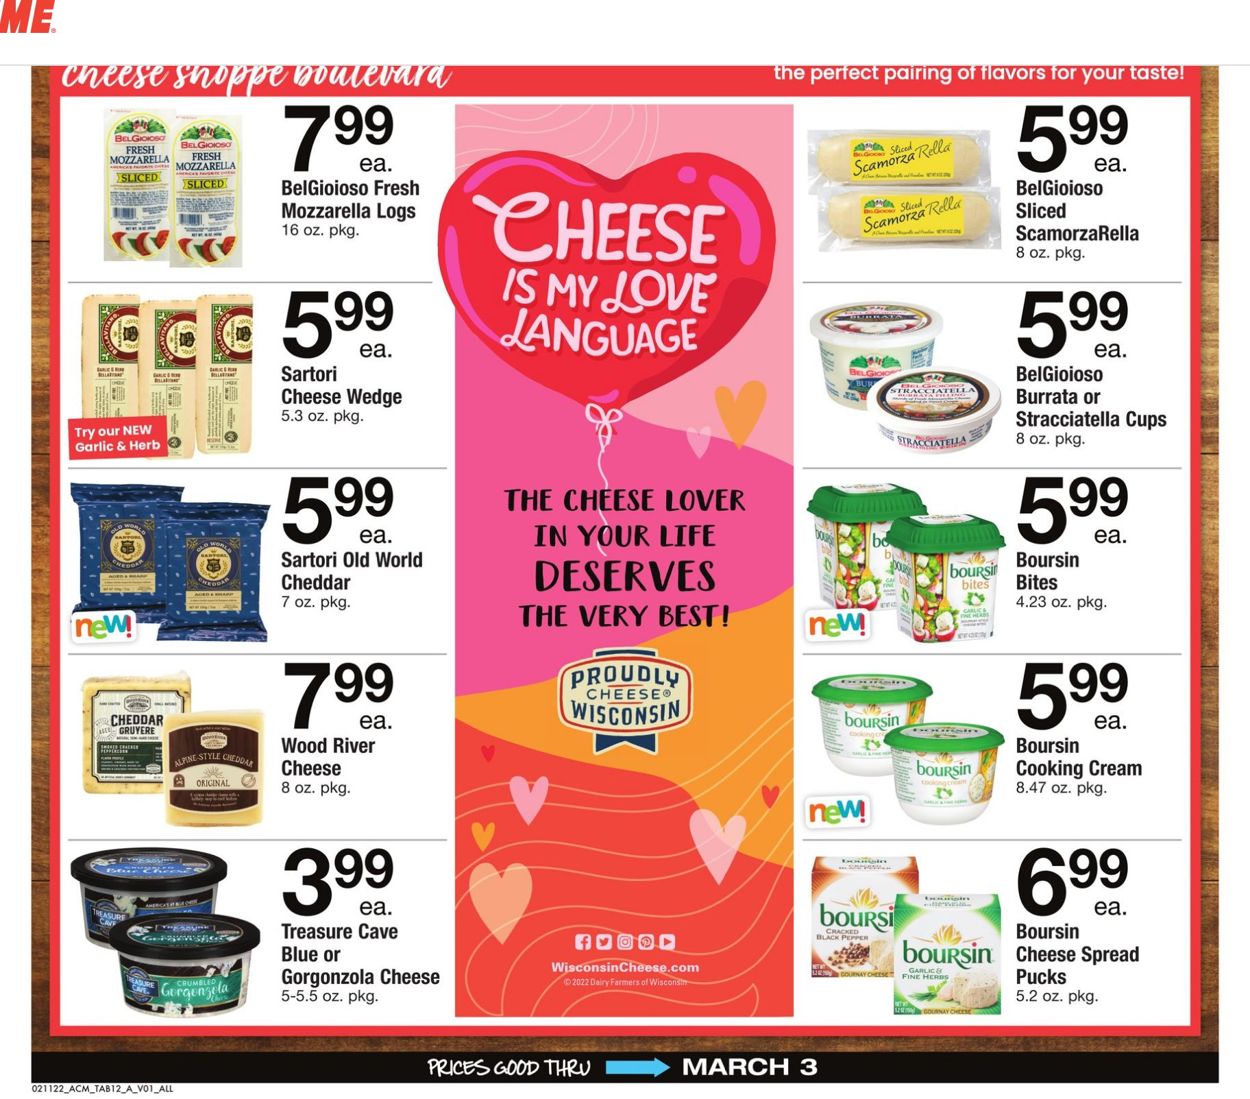 Acme Ad from 02/11/2022